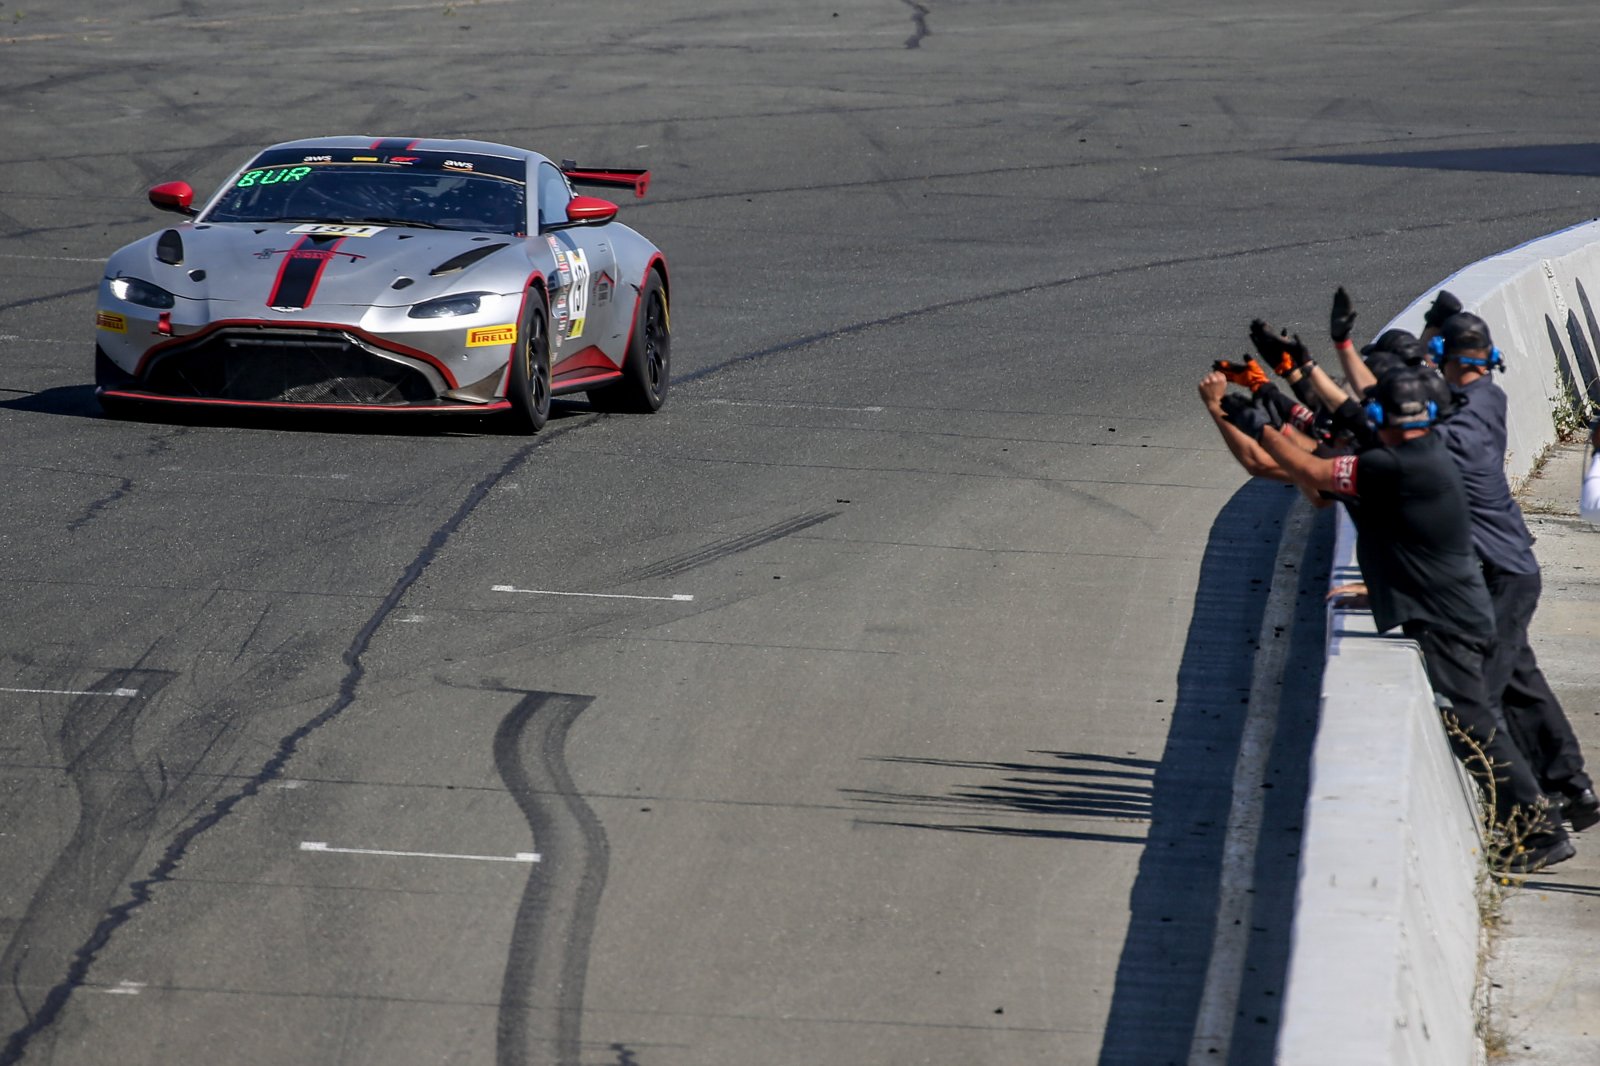 Rearden Racing Scores Serious Hardware in Pirelli GT4 America Action This Weekend in SRO America Road Racing at Sonoma Raceway